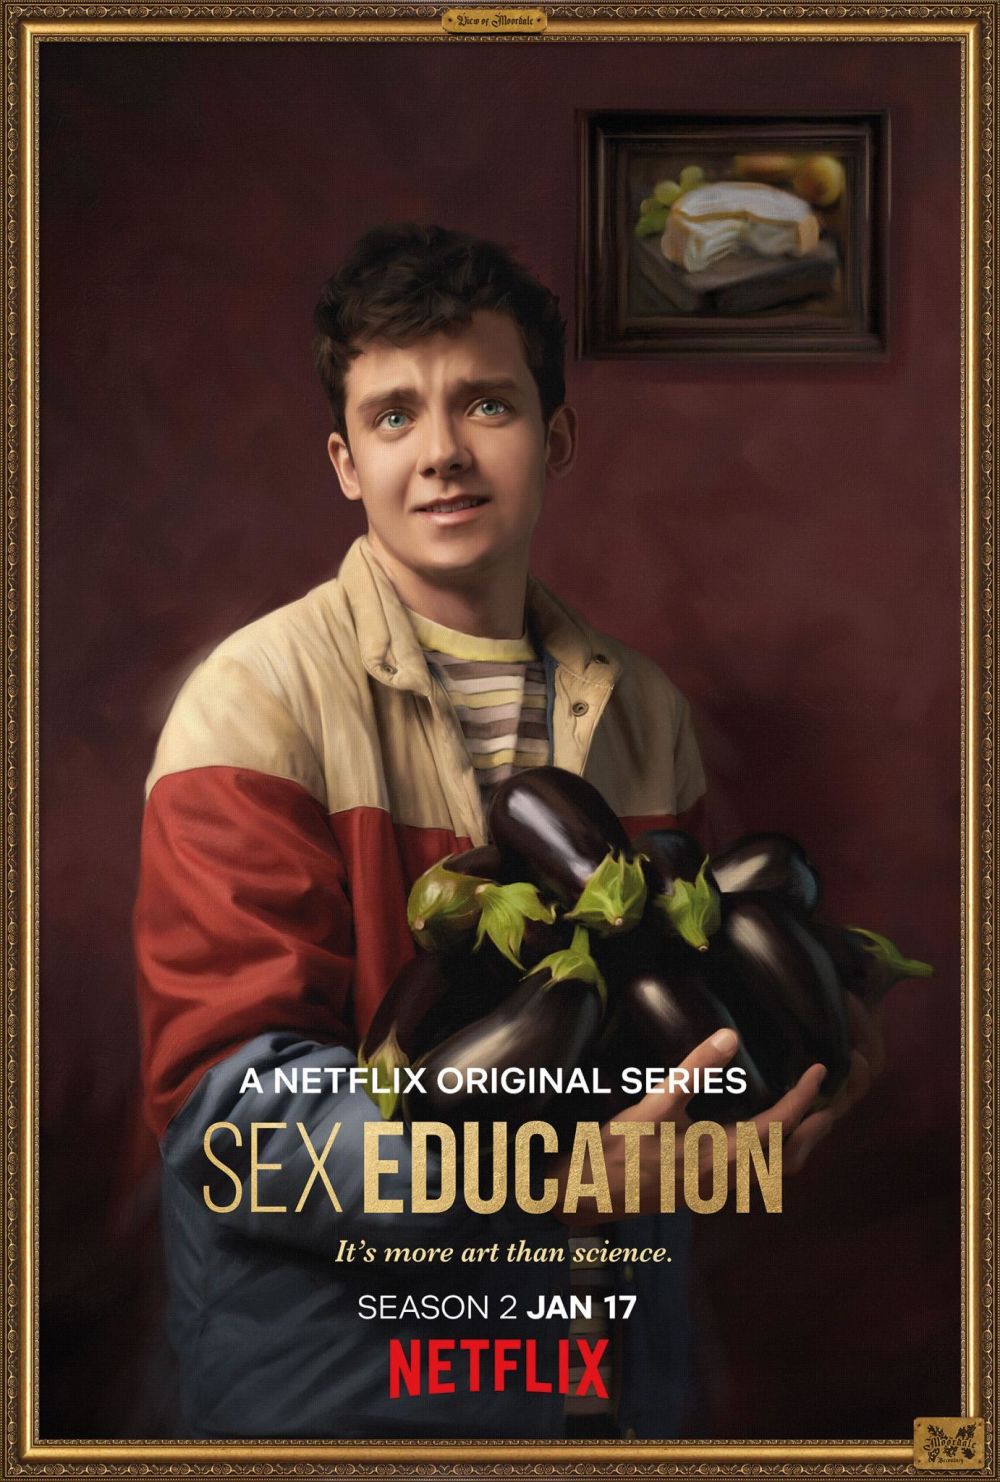 A promotional portrait of Otis from the Netflix series, Sex Education, with an armful of aubergines.